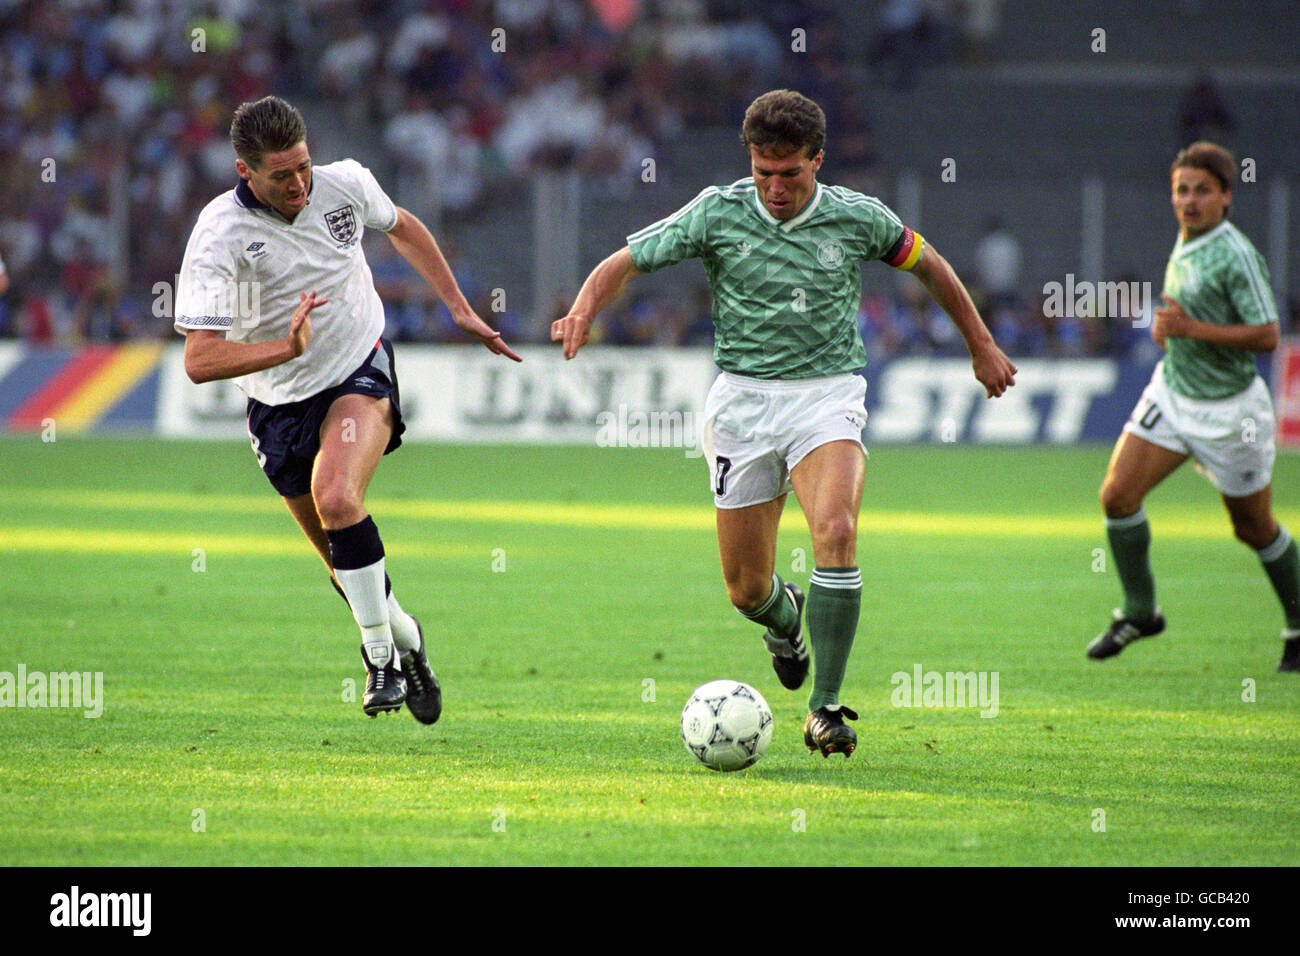 England's Chris Waddle (l) in action with West Germany captain Lothar Matthaeus (r) Stock Photo